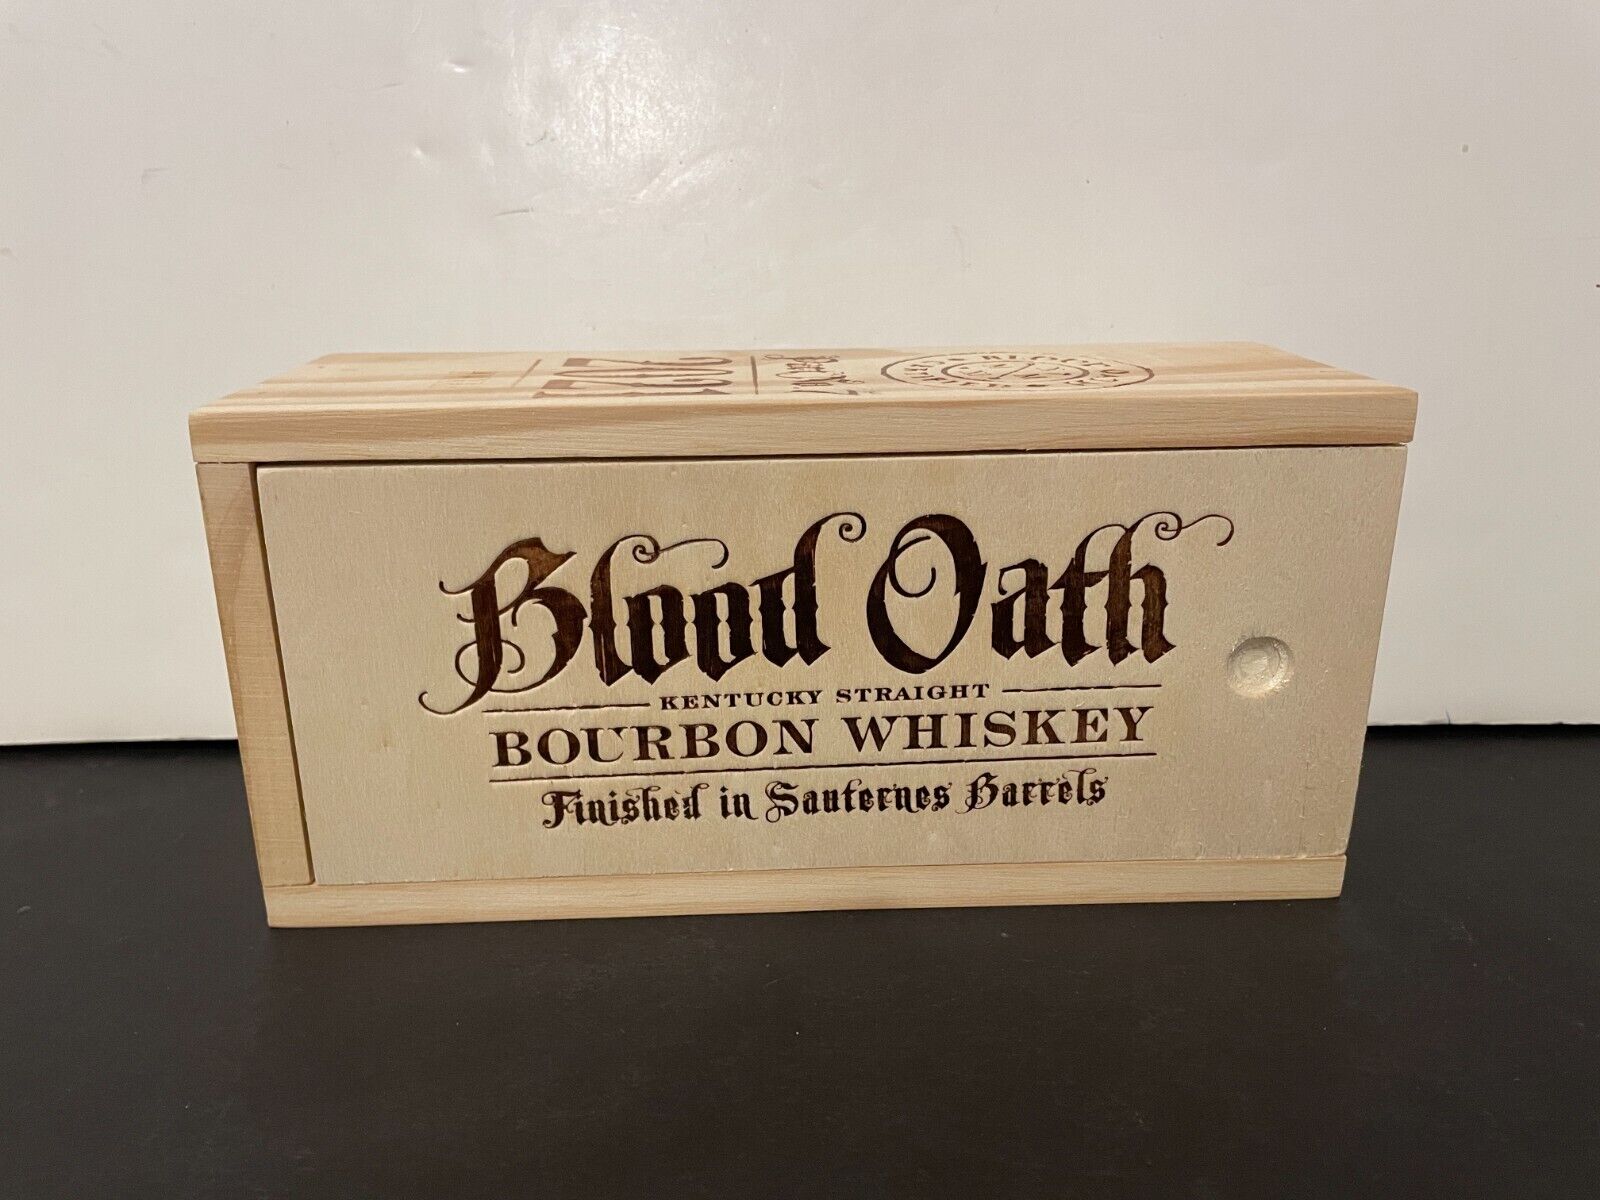 Blood Oath 2021 Bourbon Whiskey Pact No. 7 Collectors Wooden Box - No Bottle